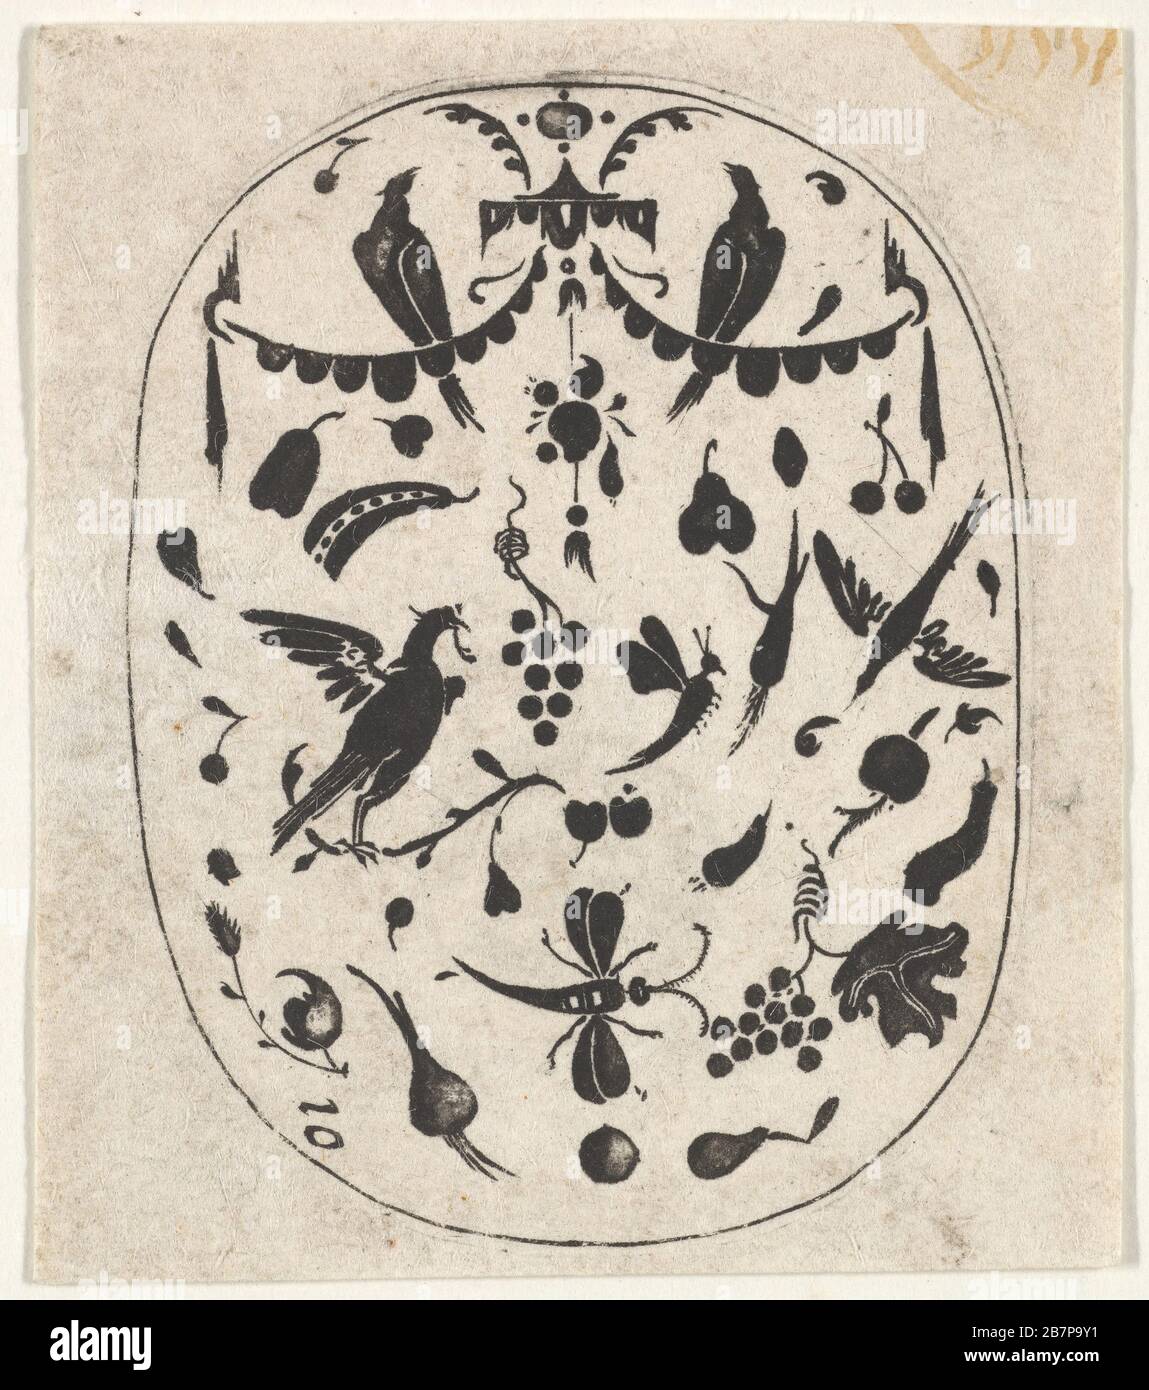 Oval Blackwork Print with Birds, Insects and Fruits, ca. 1620. After Hertzog von Brin Stock Photo